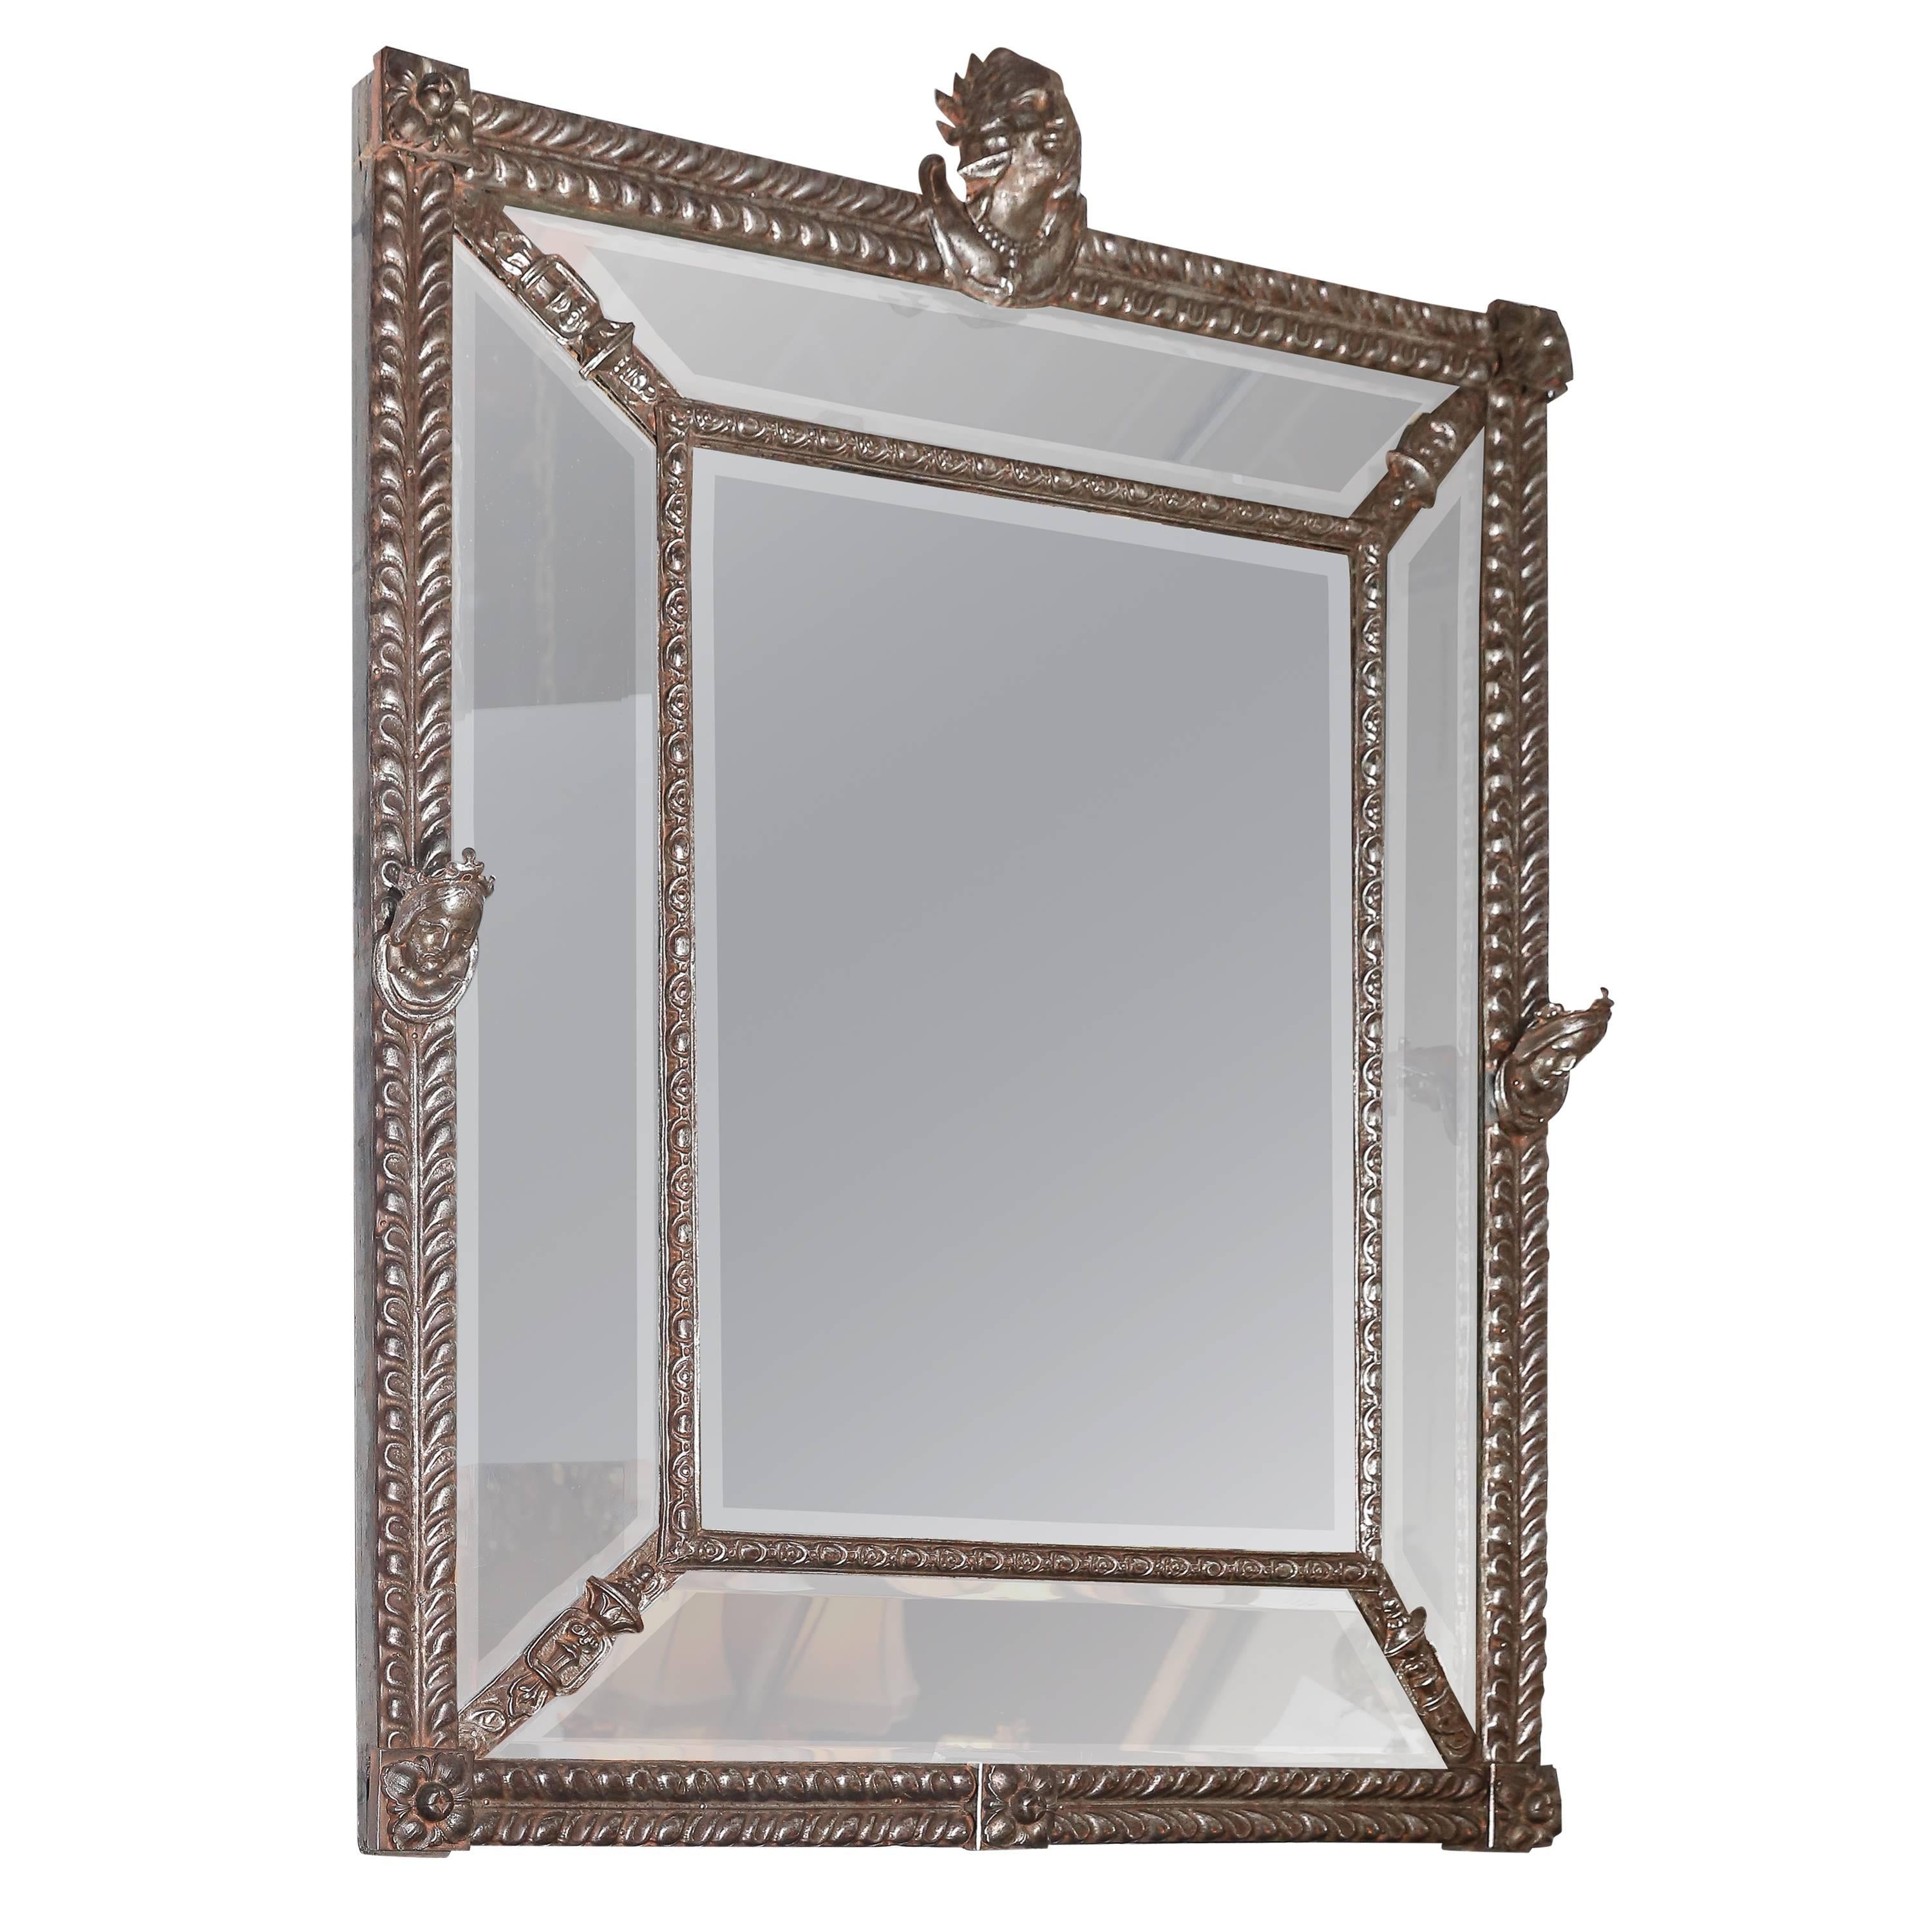 Large Beveled Mirror with Decorative Metal Frame